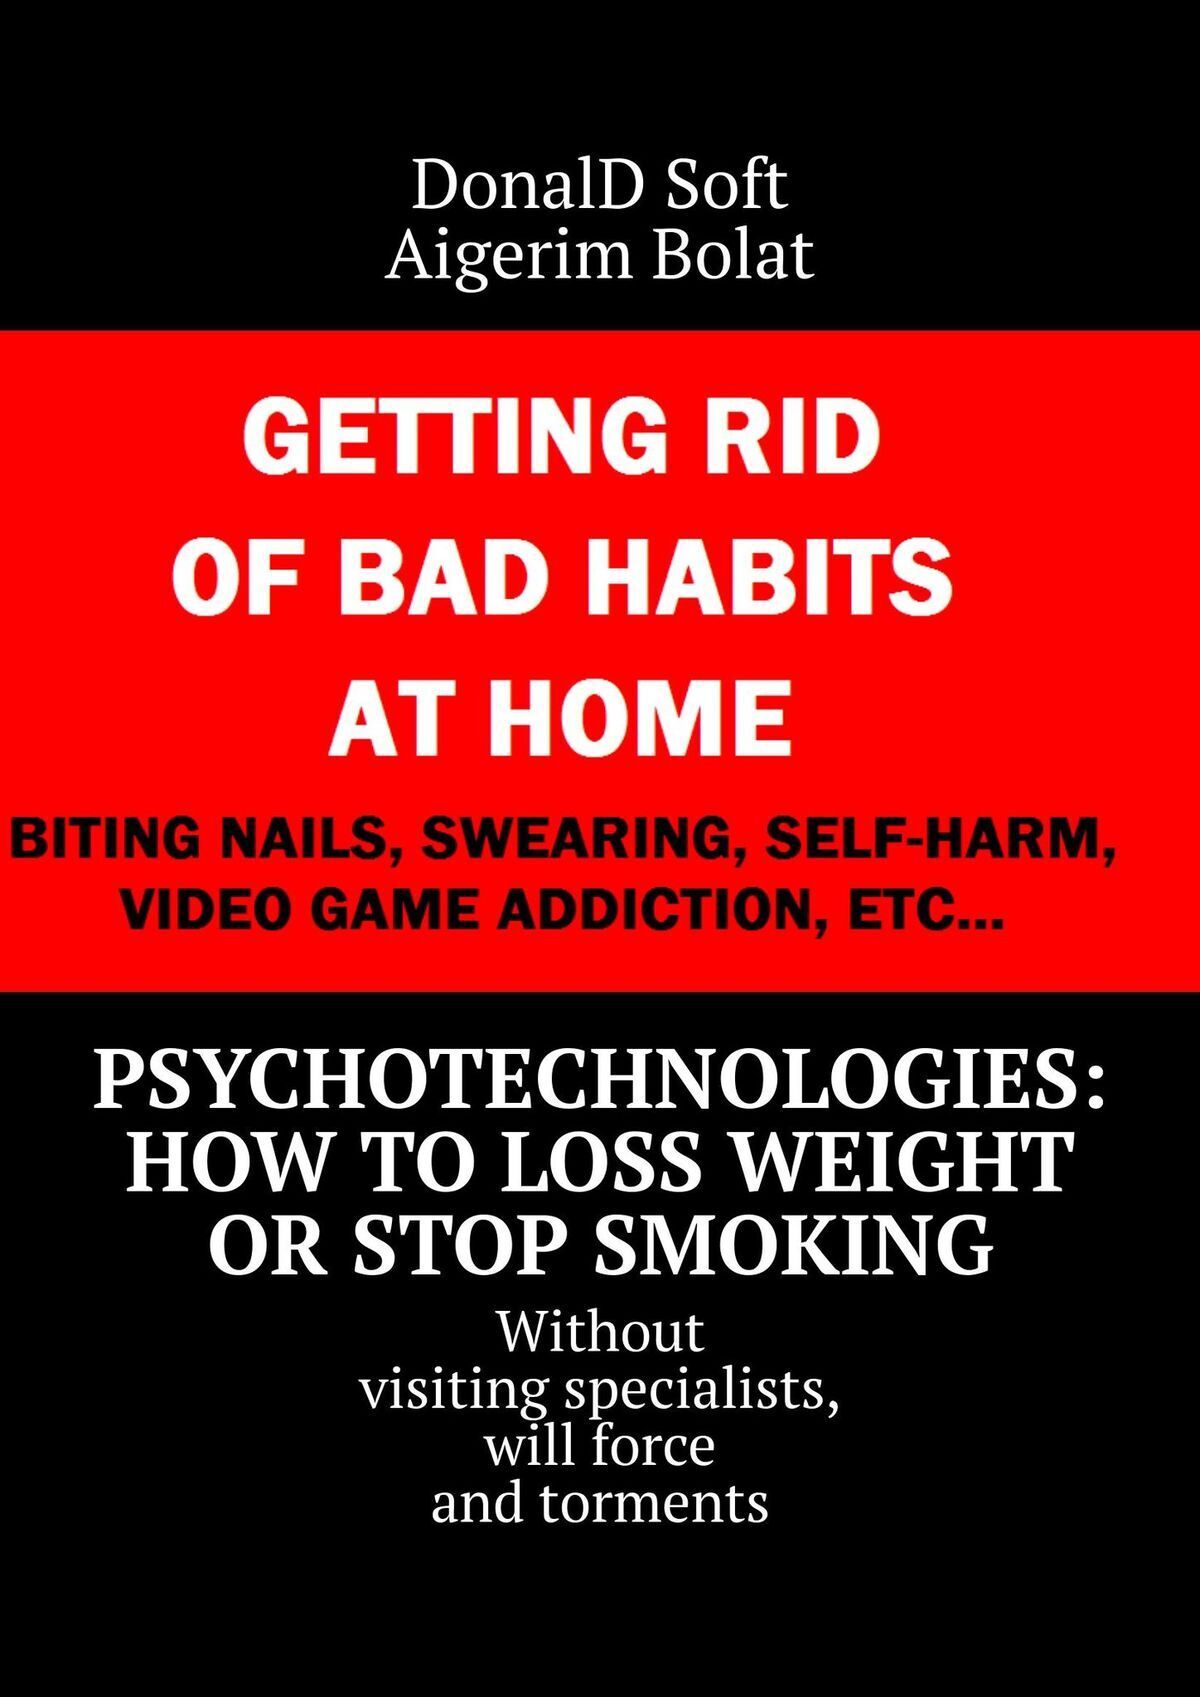 Russian psycho technologies: how to loss weight or stop smoking. without visiting specialists, will force and torments